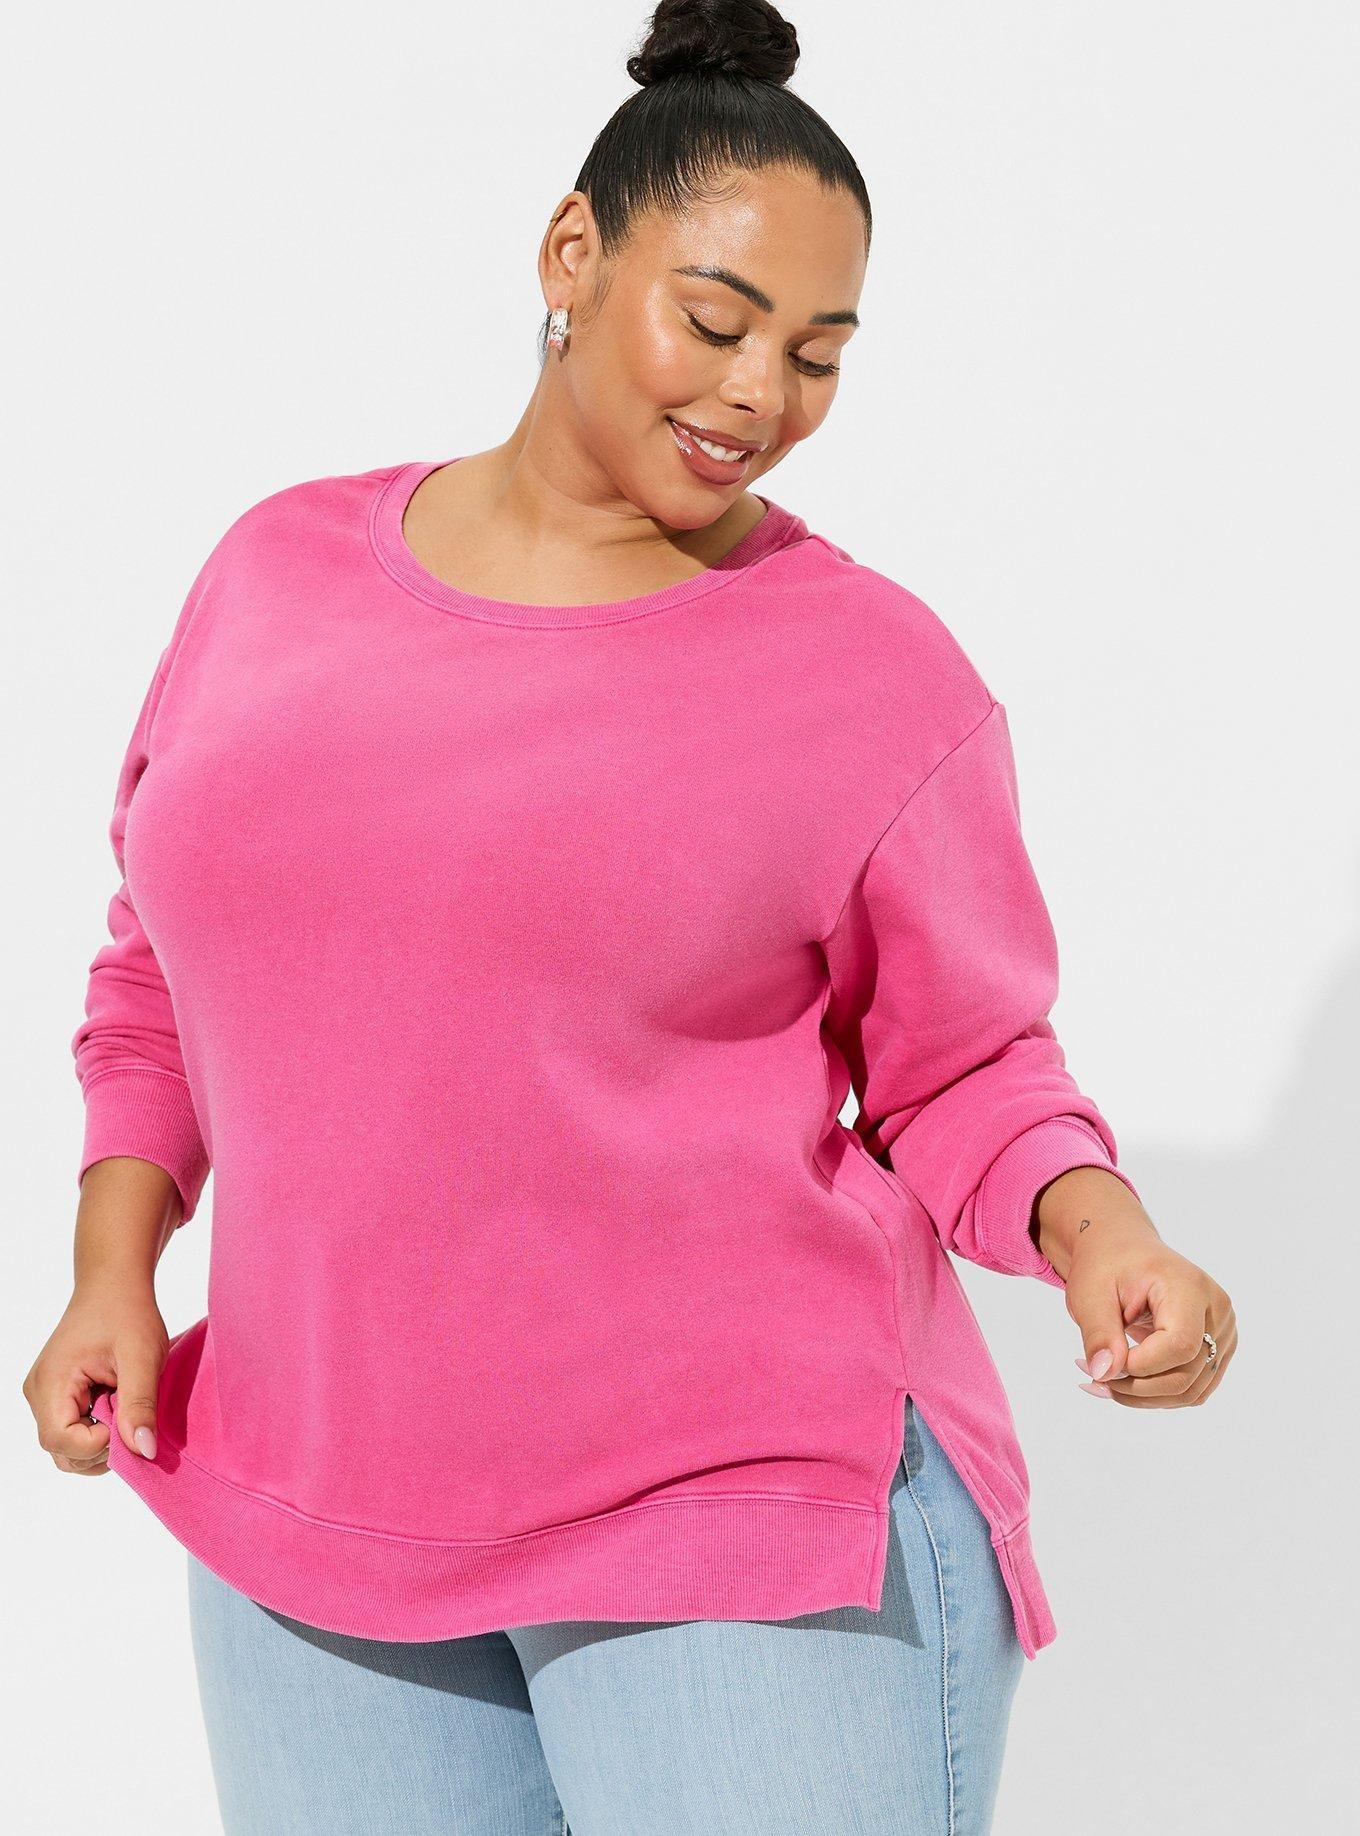 Knosfe Plus Size Tunics or Tops To Wear with Leggings Crewneck Cute Long  Sleeve Shirts Women Geometric Long Fall Sexy Women's Tunics and Blouses  Loose